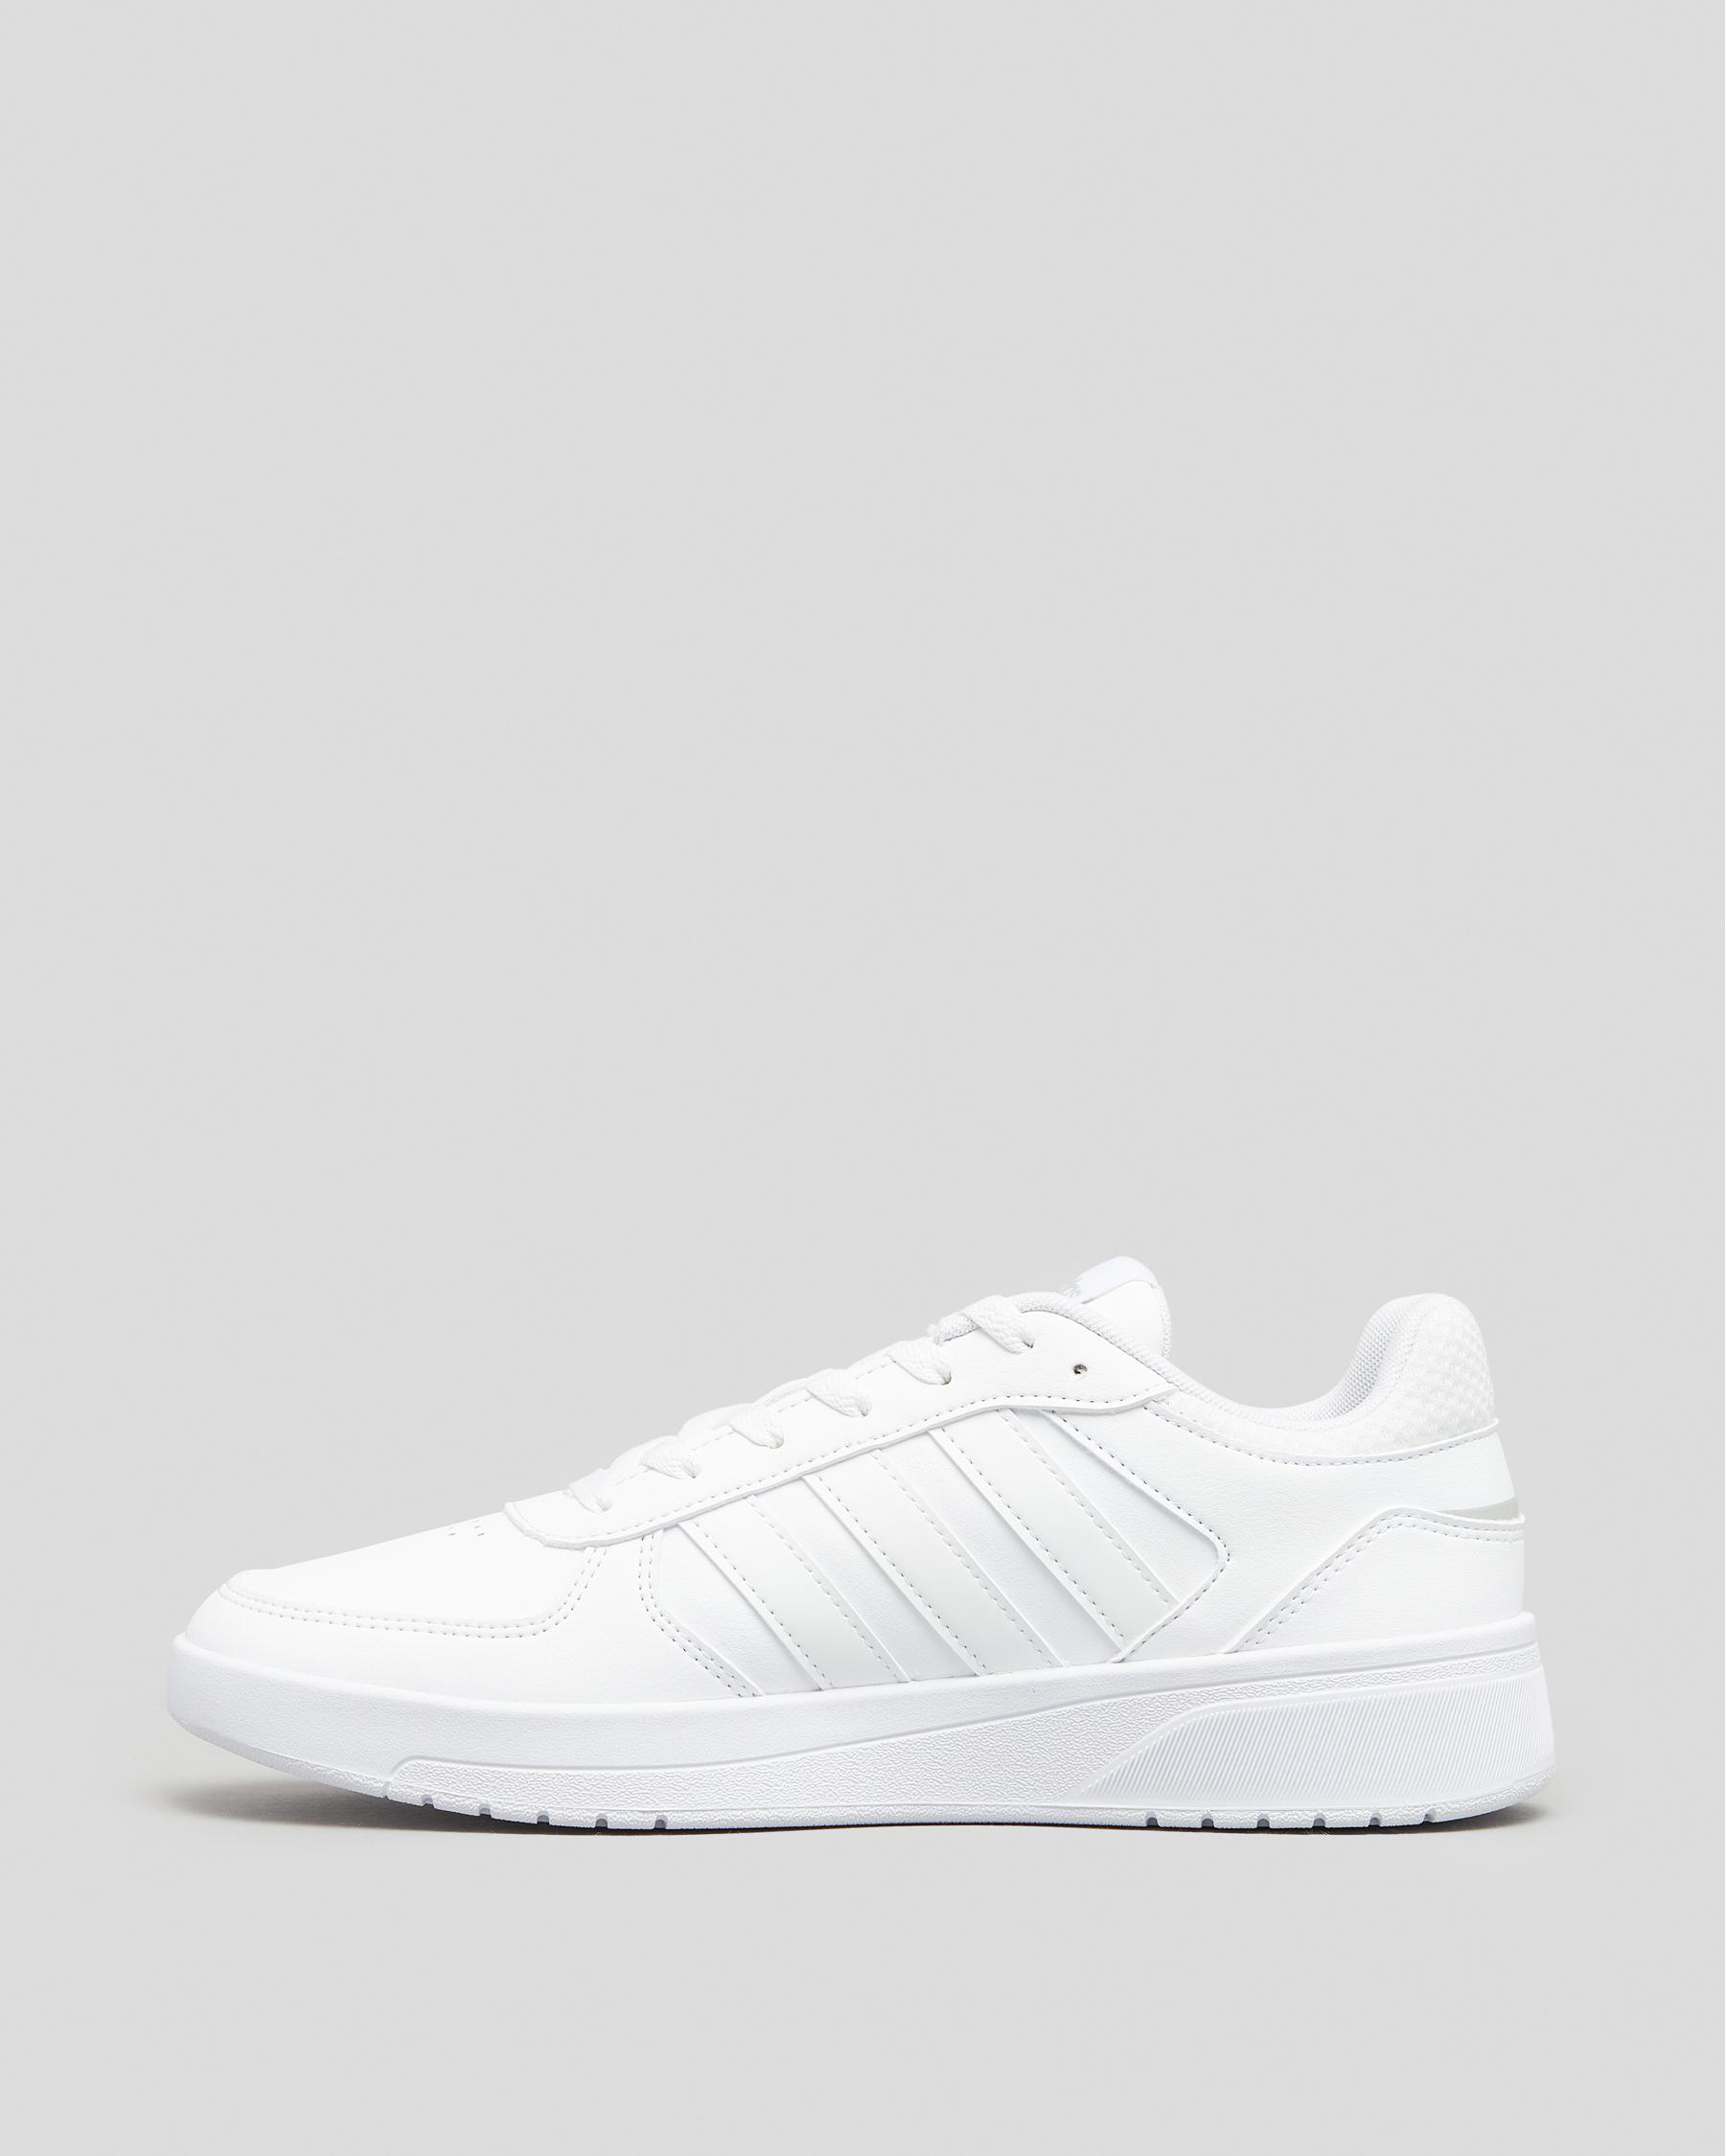 Adidas Womens Courtbeat Shoes In White/white/black - Fast Shipping ...